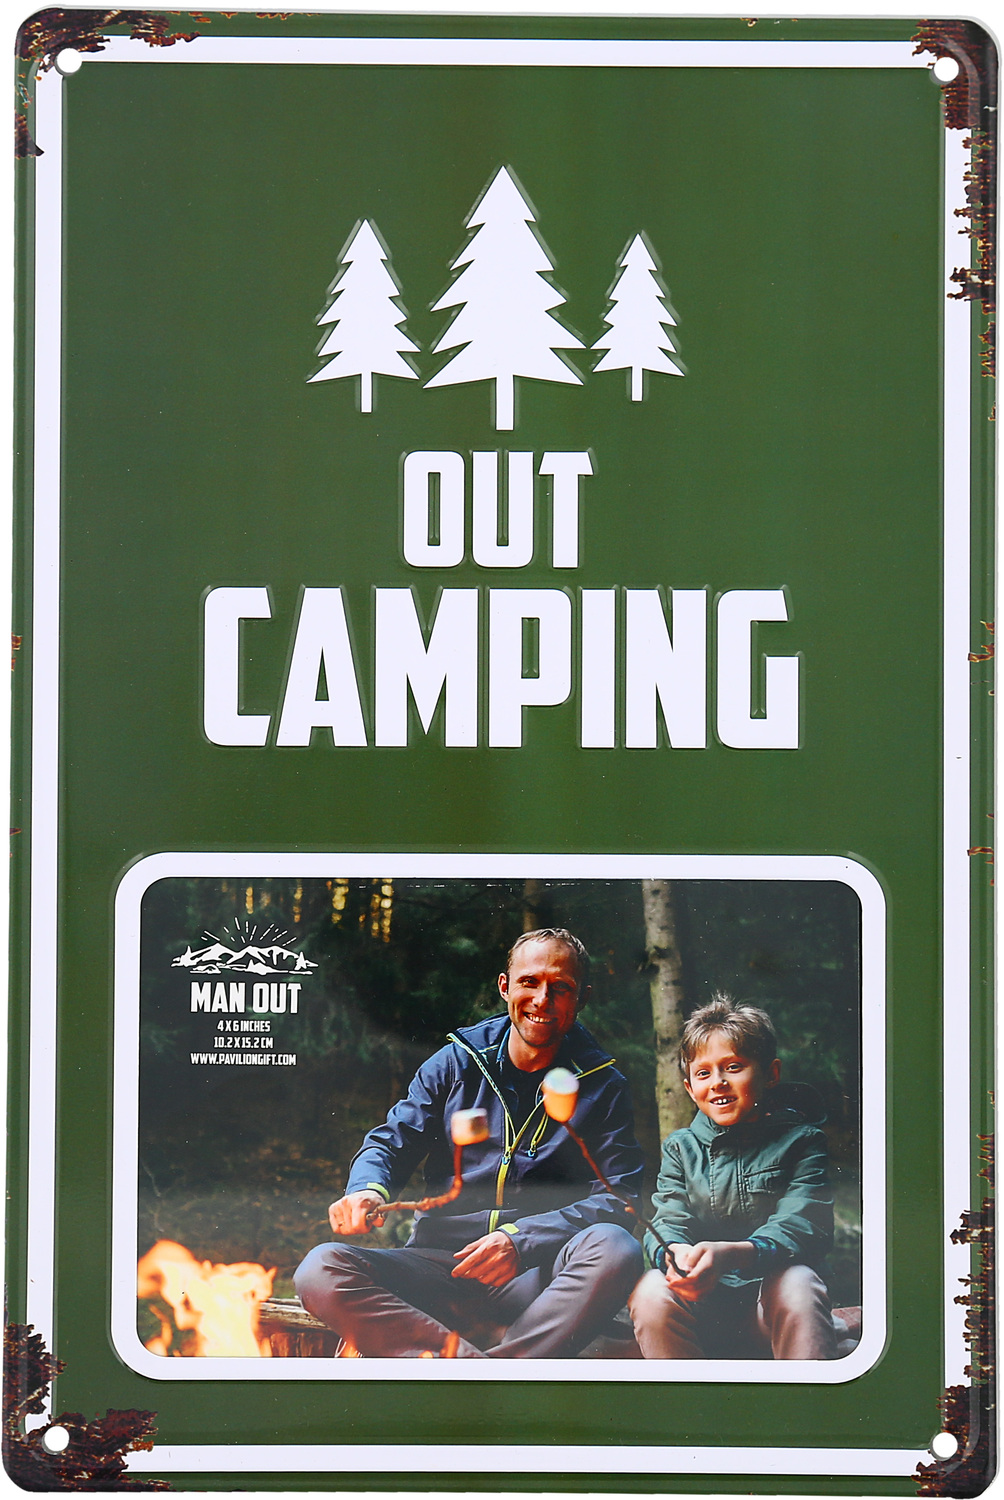 Out Camping by Man Out - Out Camping - 8" x 11.75" Tin Frame
(Holds 6" x 4" Photo)